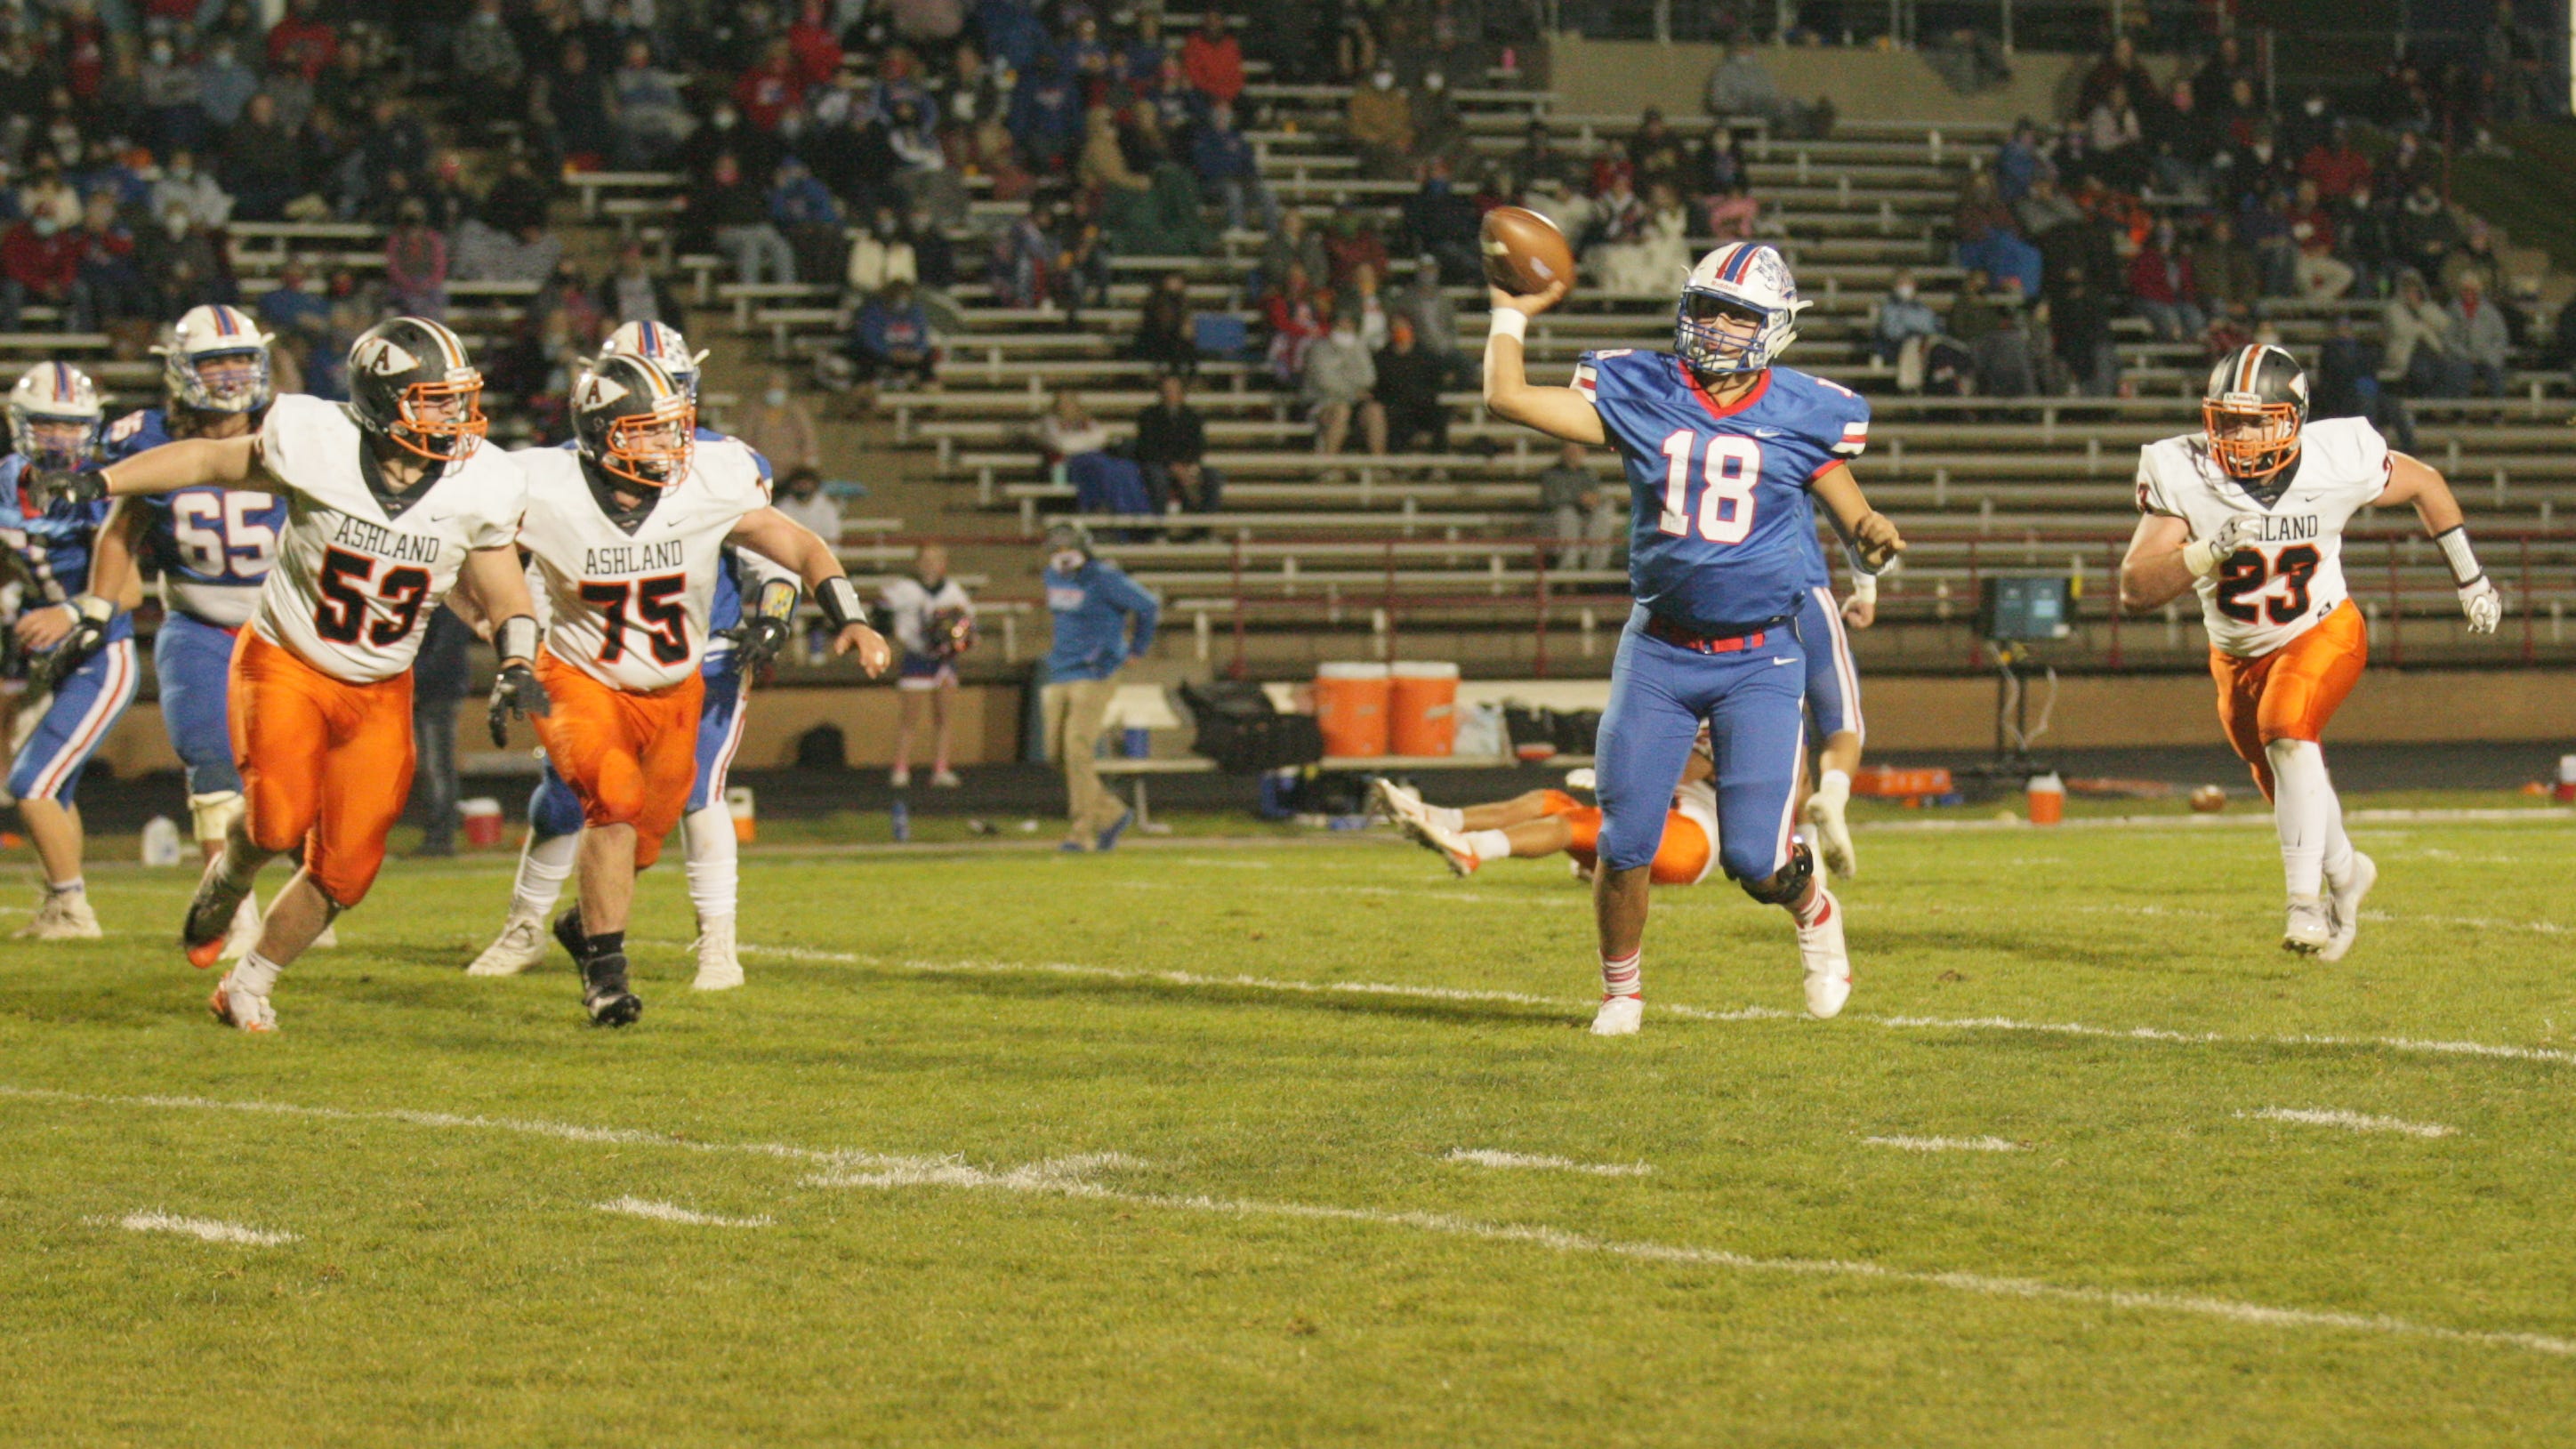 FOOTBALL West Holmes scores 35 unanswered points to top Ashland